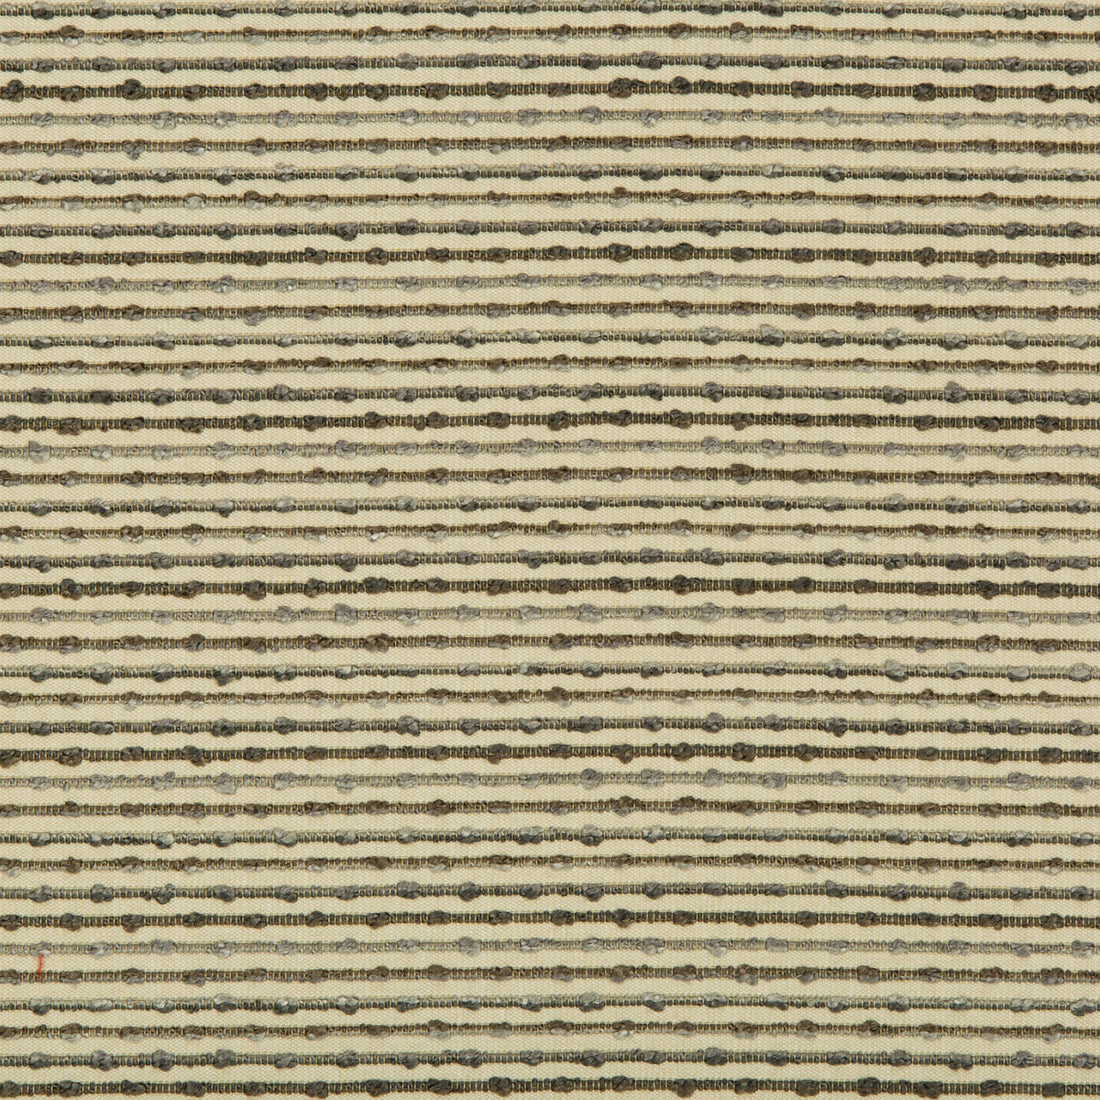 Kravet Contract fabric in 35124-621 color - pattern 35124.621.0 - by Kravet Contract in the Incase Crypton Gis collection